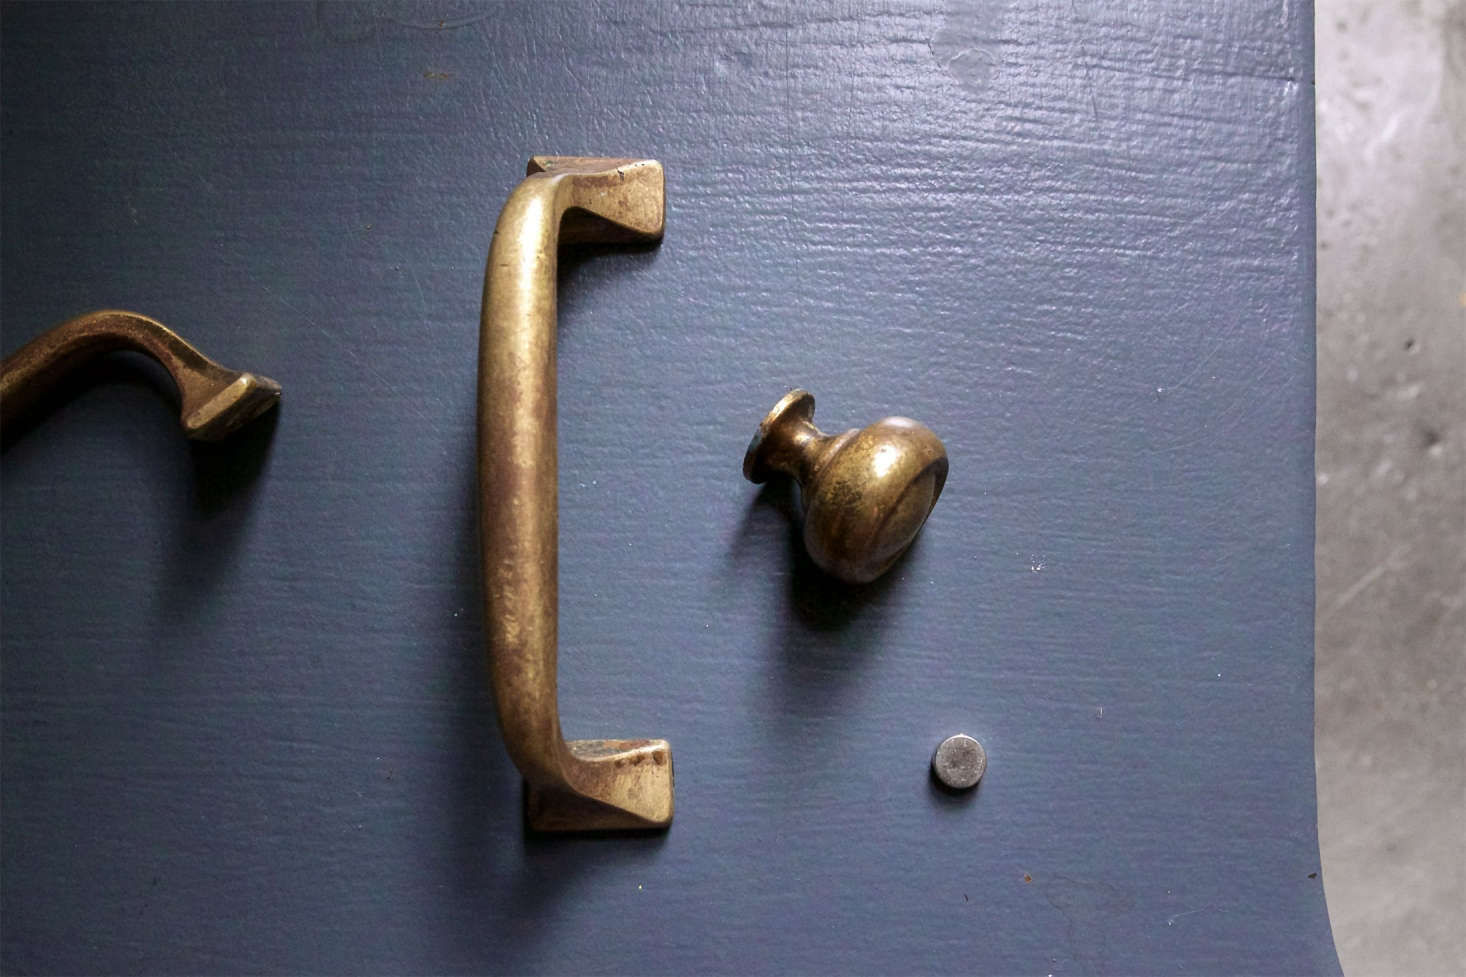 Domestic Science: How to Polish Brass Cabinet Hardware - Remodelista